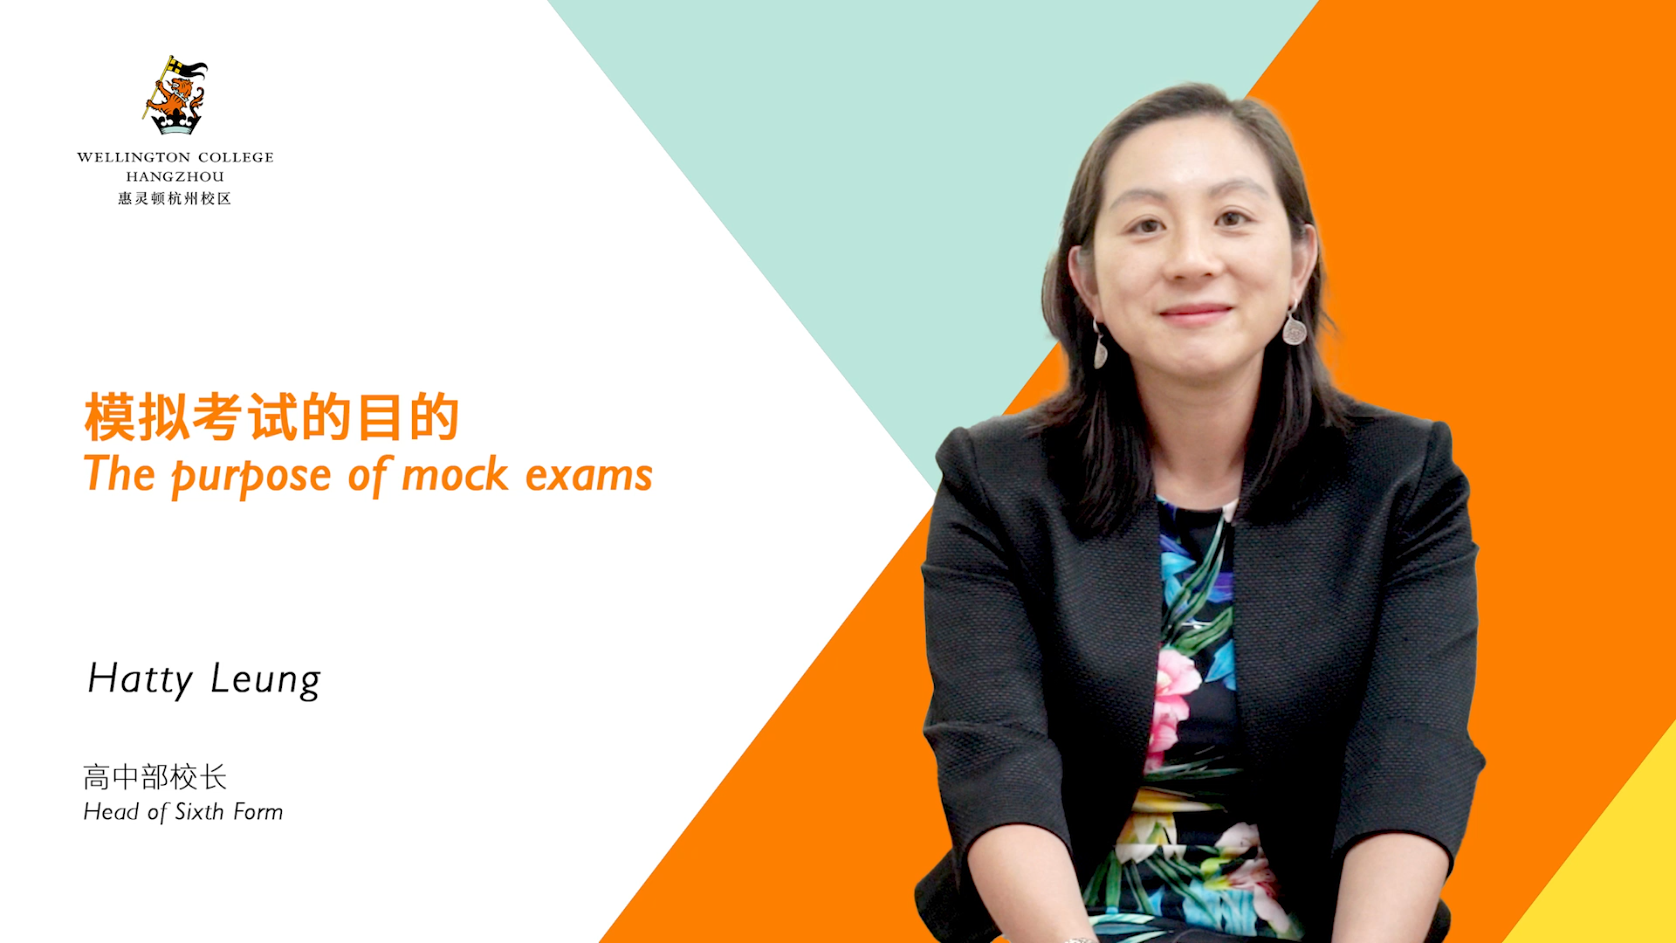 The purpose of mock exams